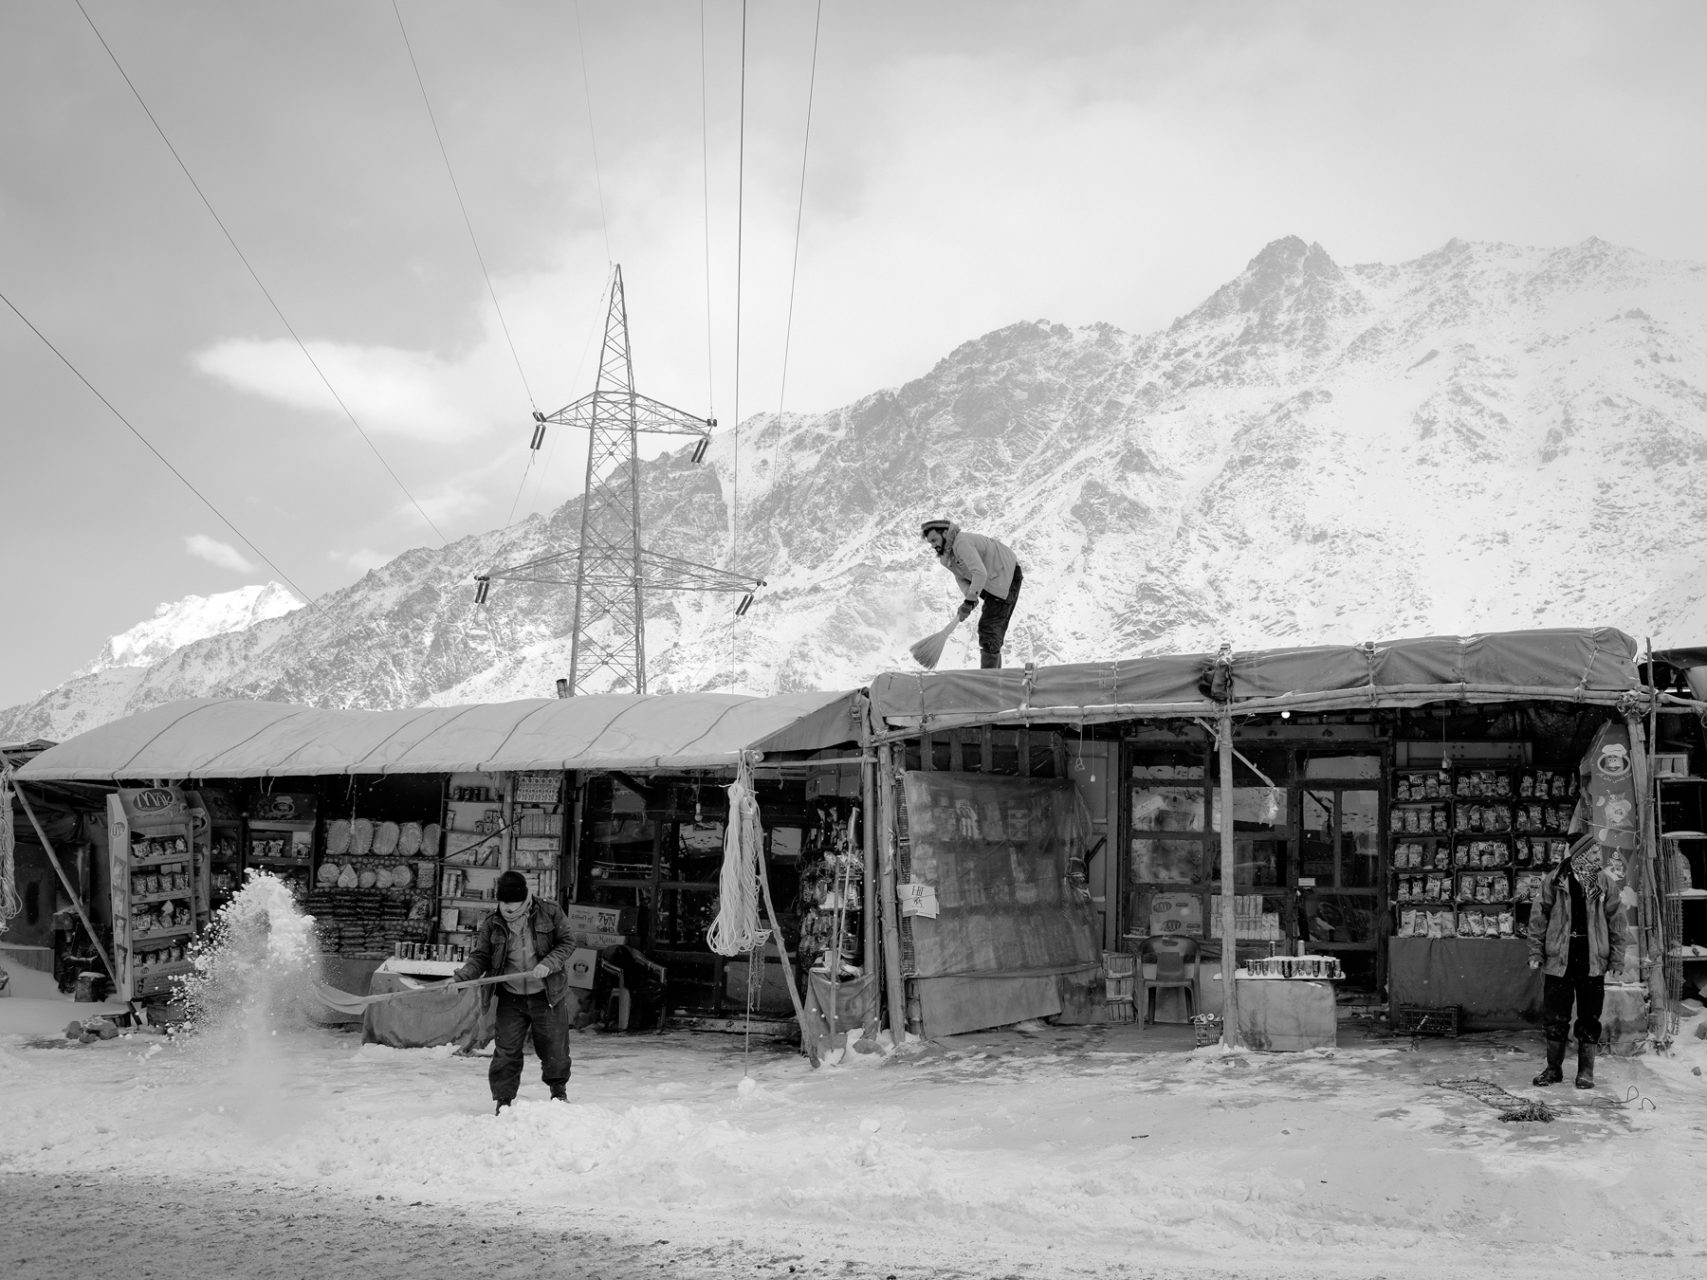 Shop keepers at the northern end of the Salang tunnel clean their shop fronts and roofs from the fresh snow fallen over night.